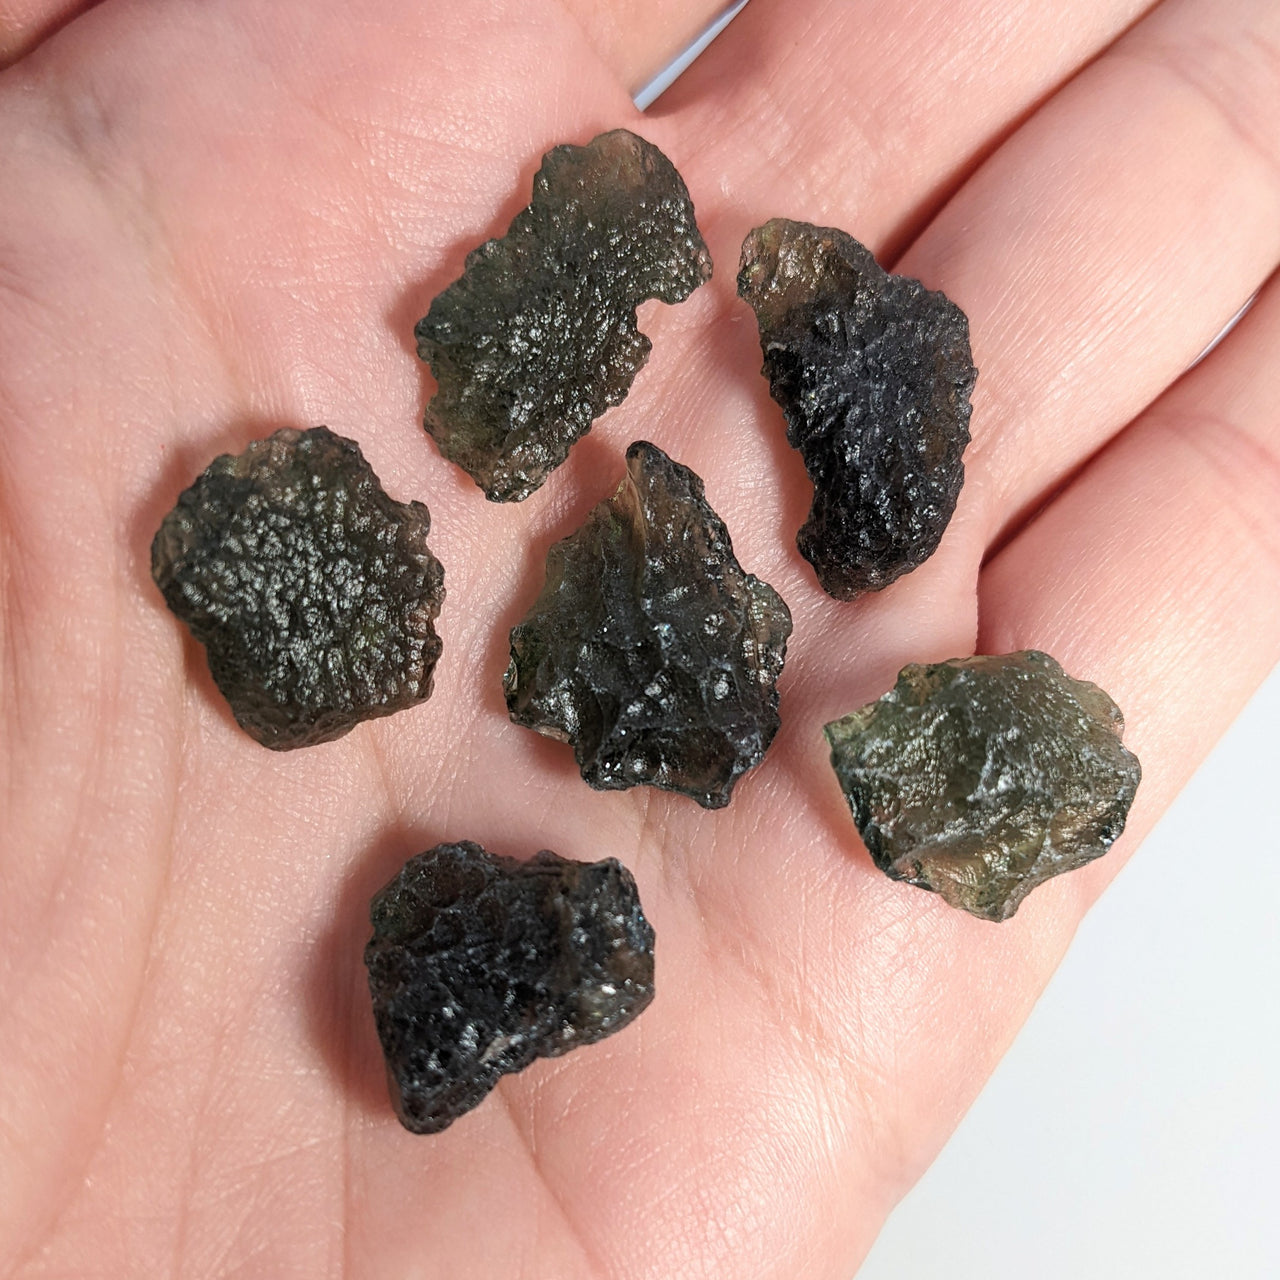 6 rough-cut moldavite crystals in the palm of the hand